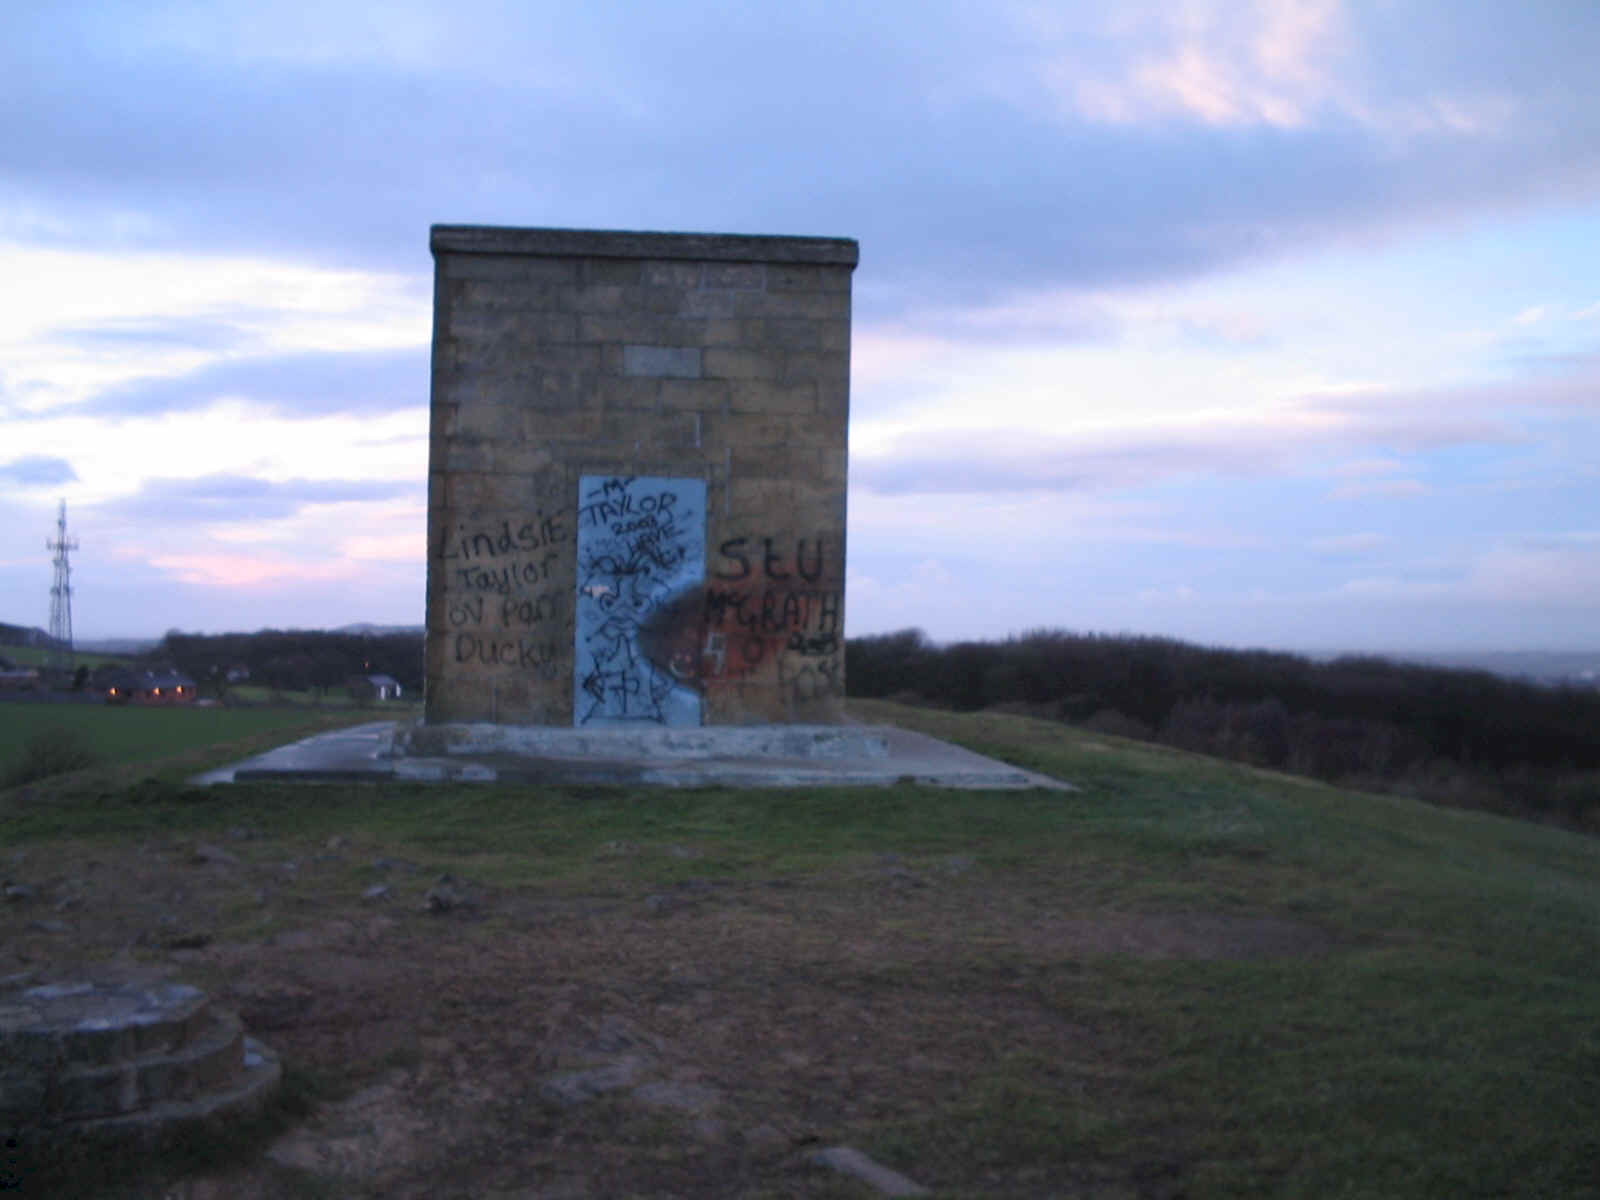 Thought to be a water tower on the summit of Billinge Hill